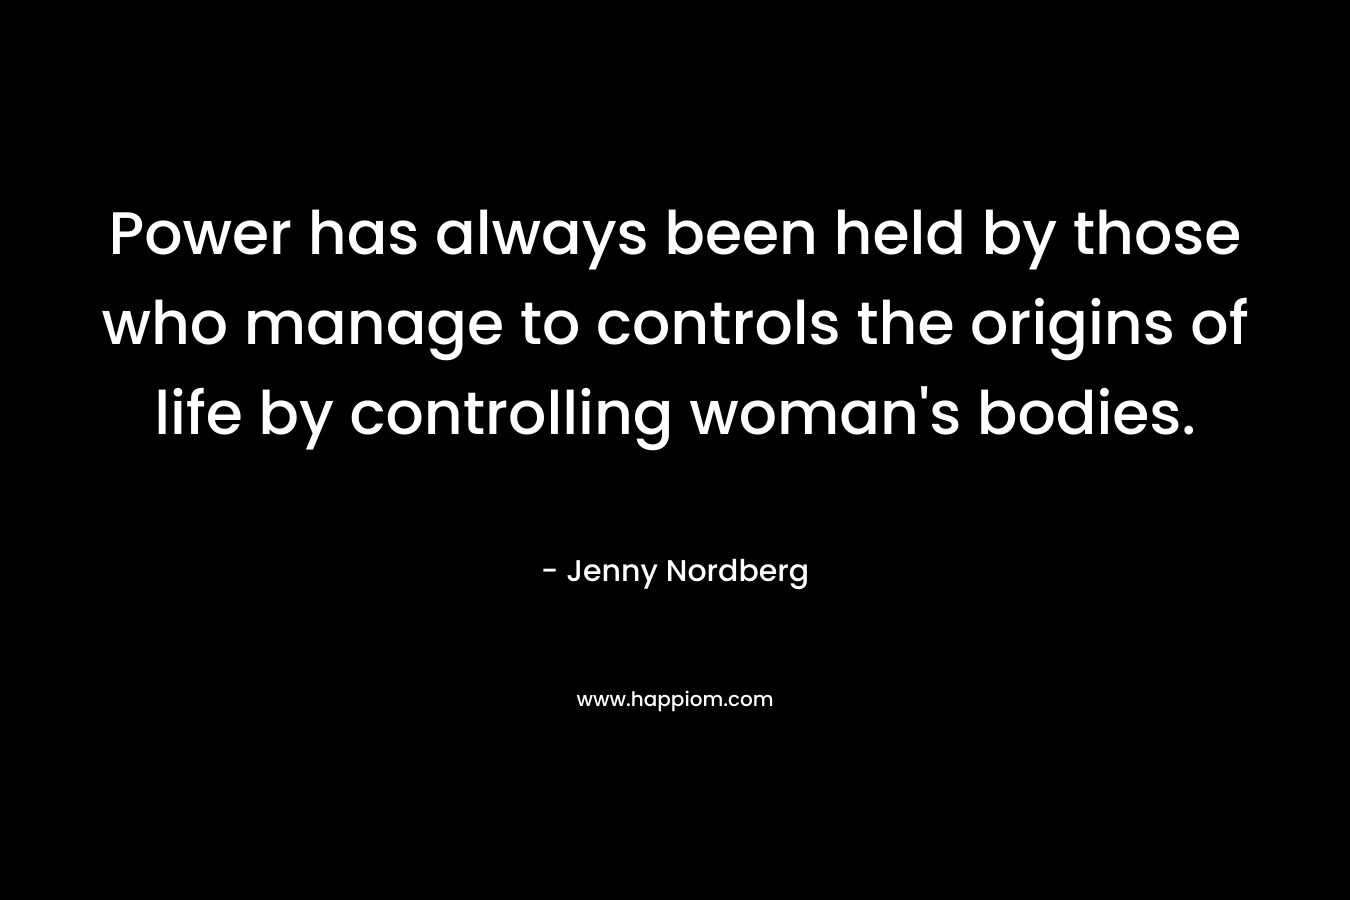 Power has always been held by those who manage to controls the origins of life by controlling woman's bodies.